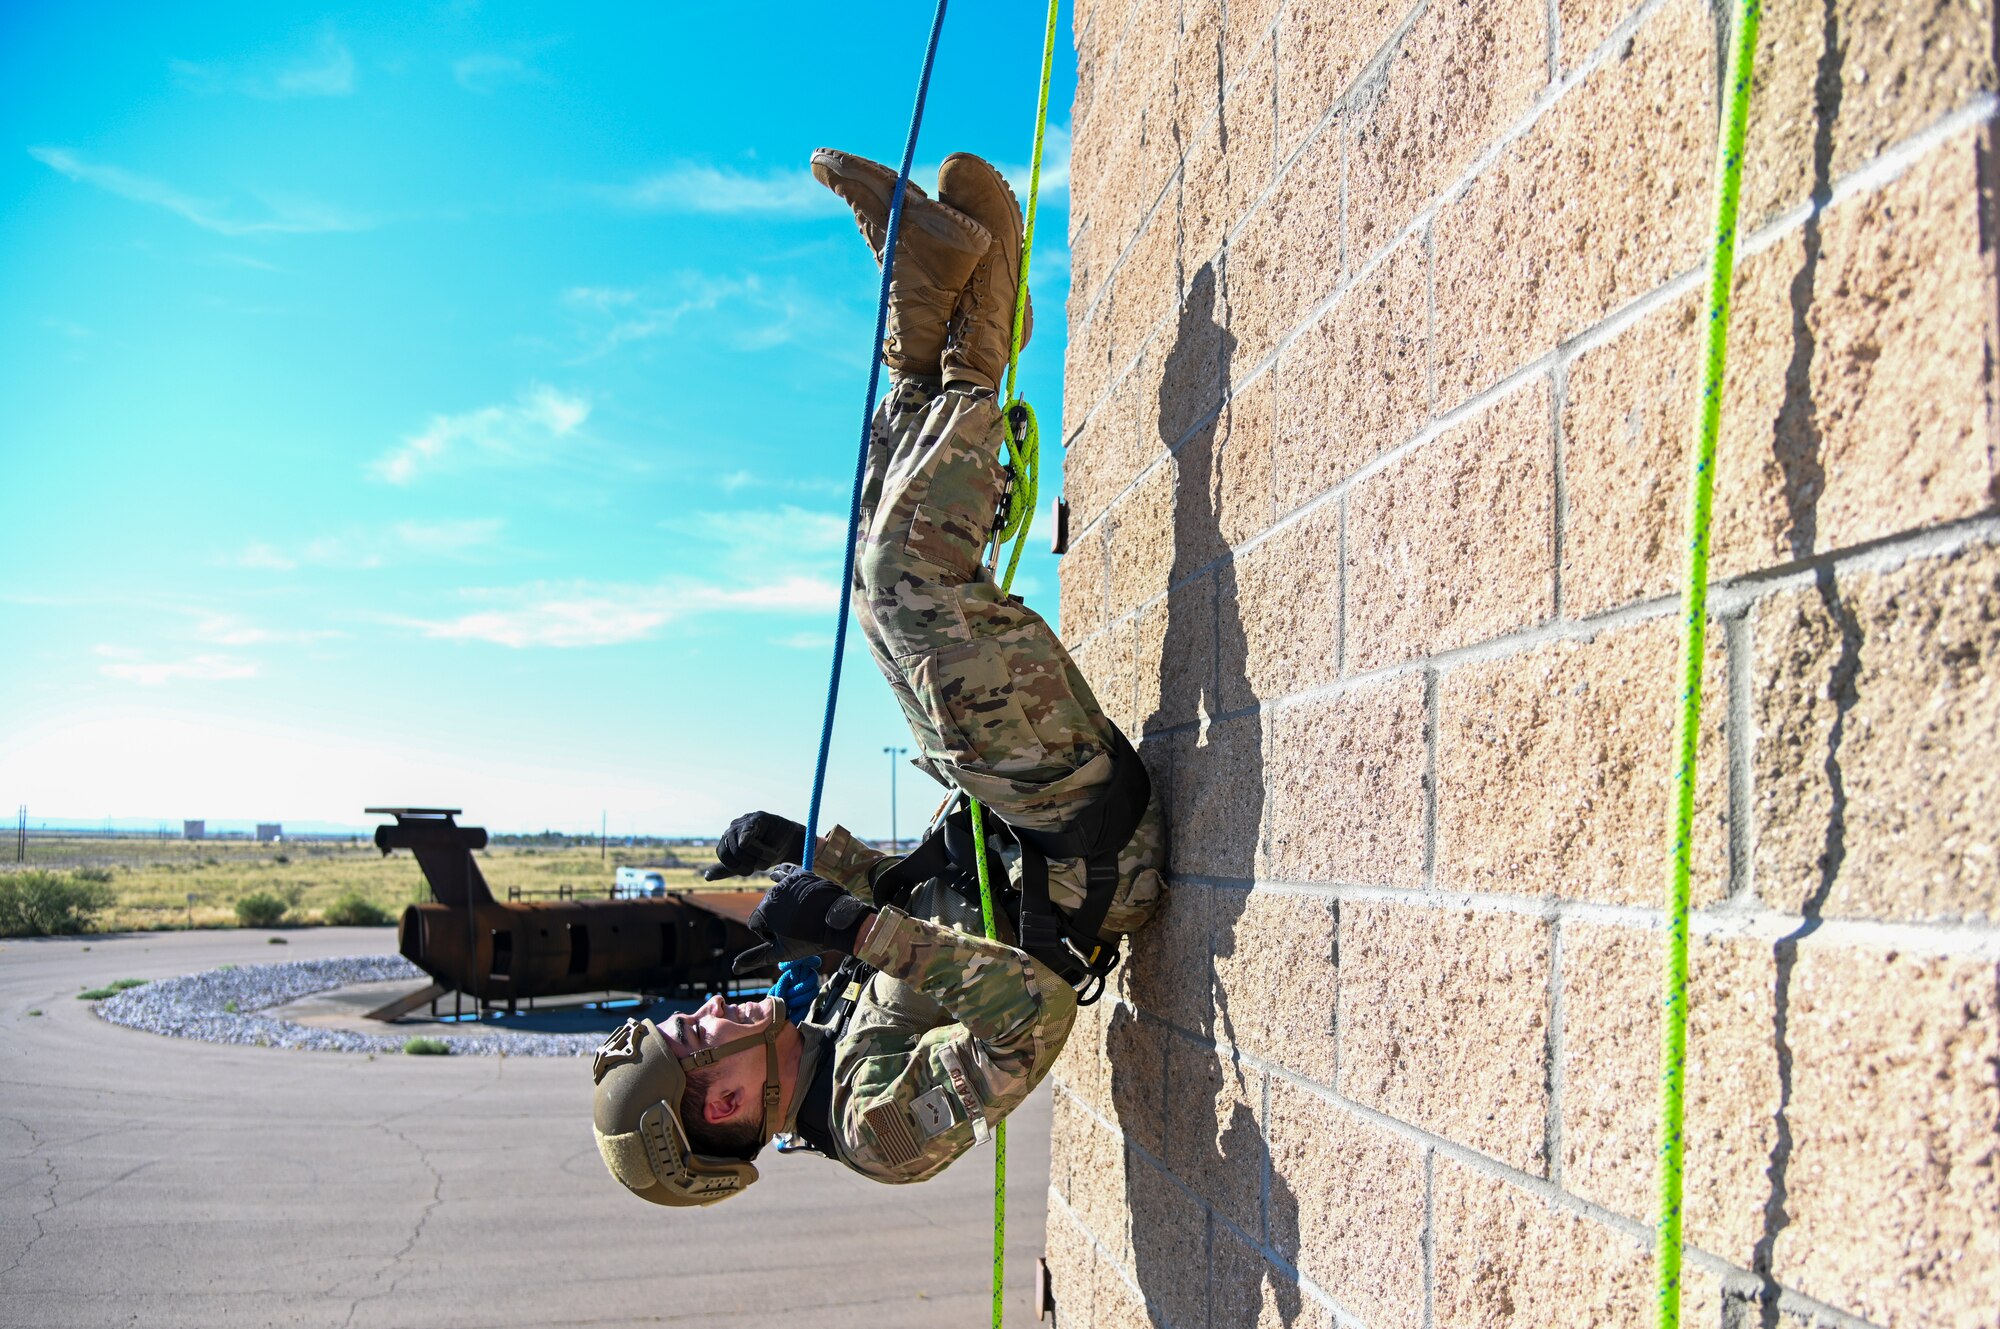 Airman 1st Class Isaiah Tirado, 49th Security Forces Squadron installation entry controller, hangs upside down during the 49th Wing’s first rappel skills training, Oct. 5, 2021, on Holloman Air Force Base, New Mexico. Holloman Defenders and firefighters learned rappel skills to use for rapid building entry and exit in hostile situations. (U.S. Air Force photo by Airman 1st Class Jessica Sanchez-Chen)